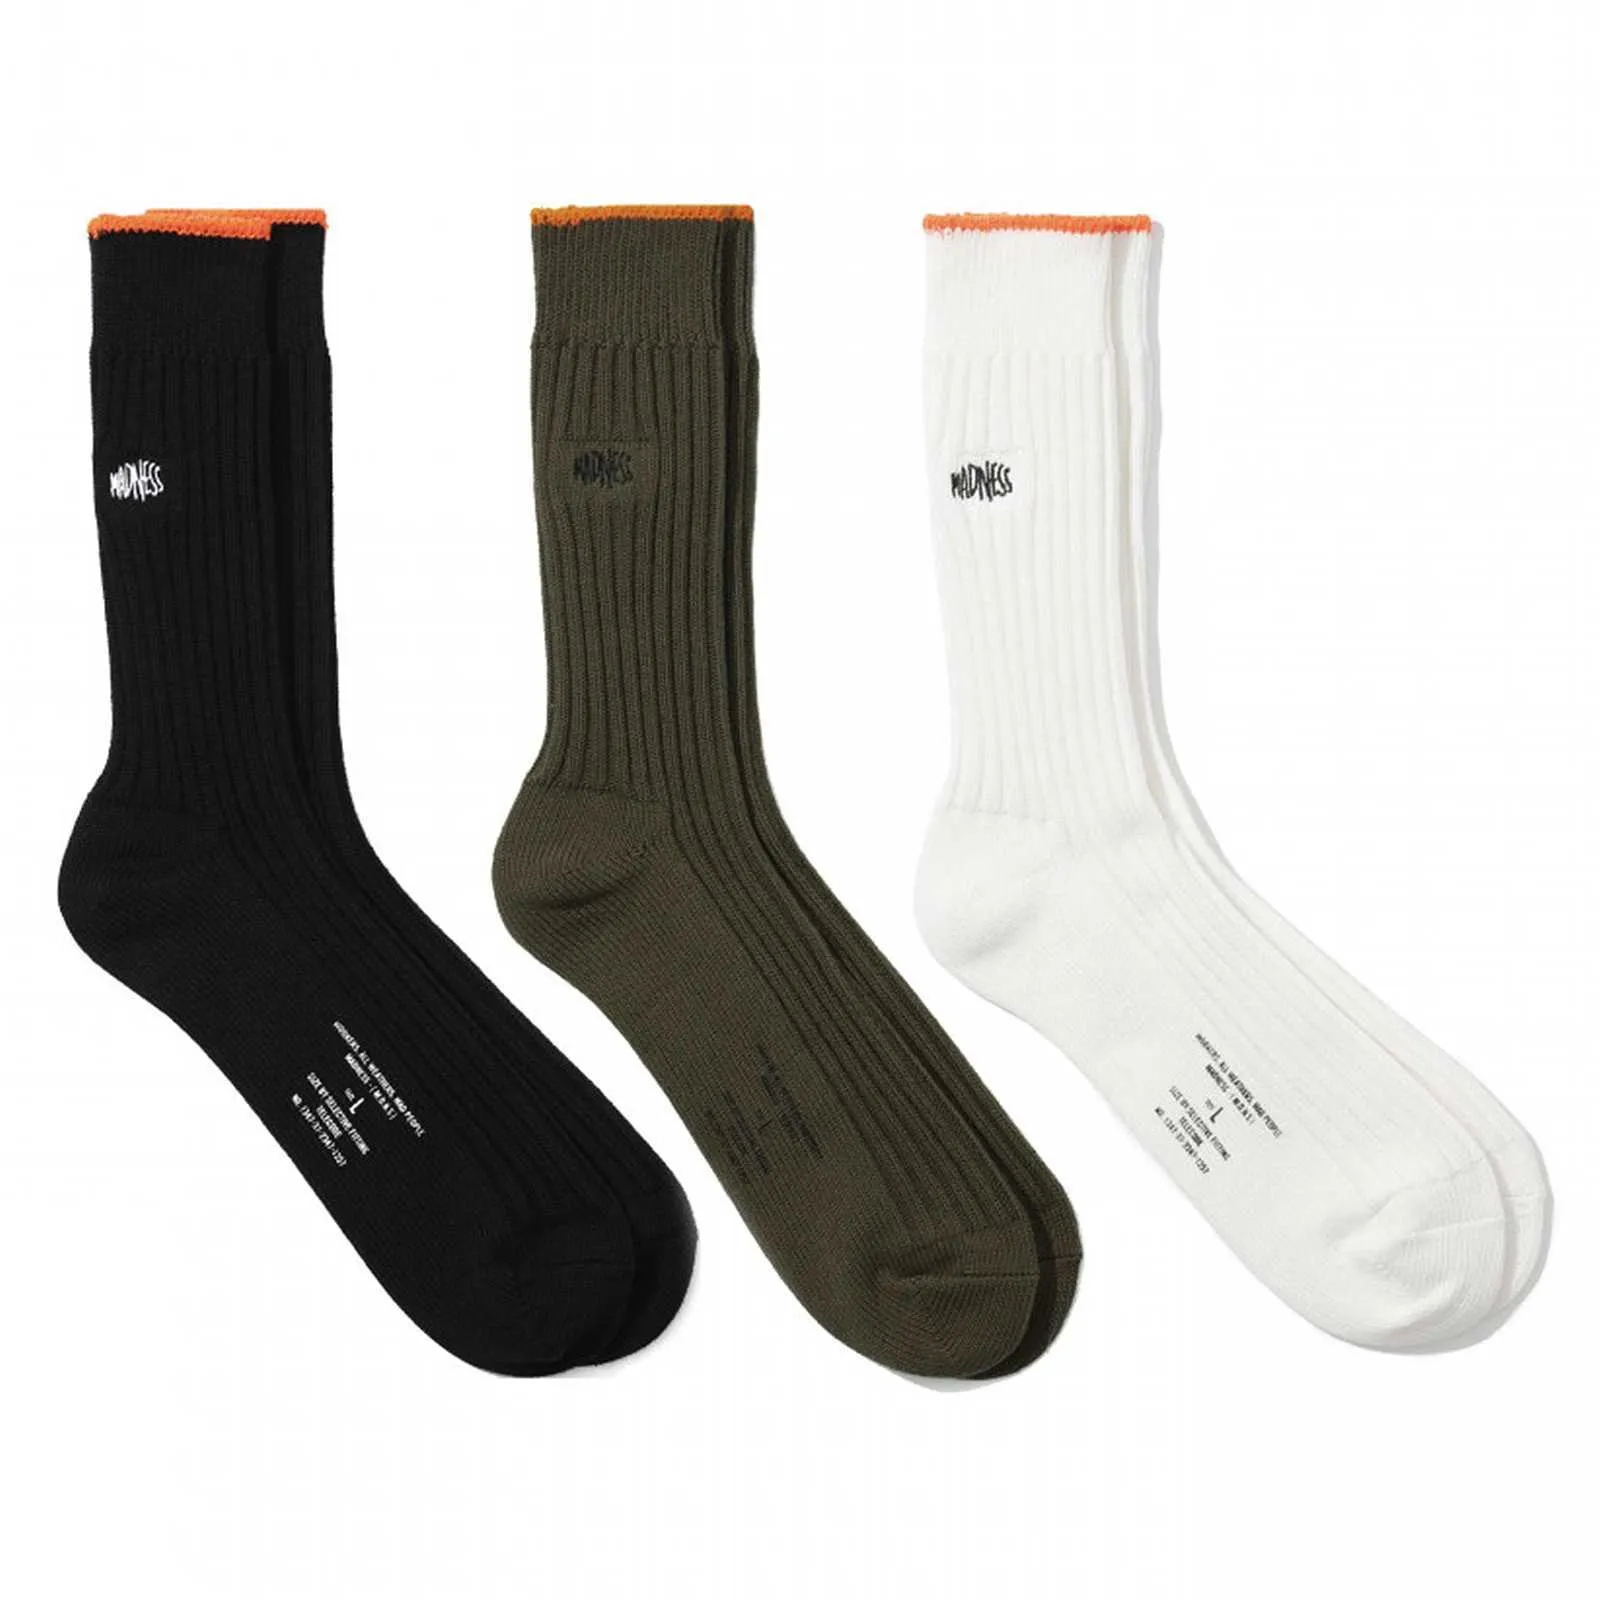 Yu Wenles MDNS Lokmadness Embroidered Golf Socks For Men Versatile And  Trendy For Men And Women From Ioctopus, $9.08